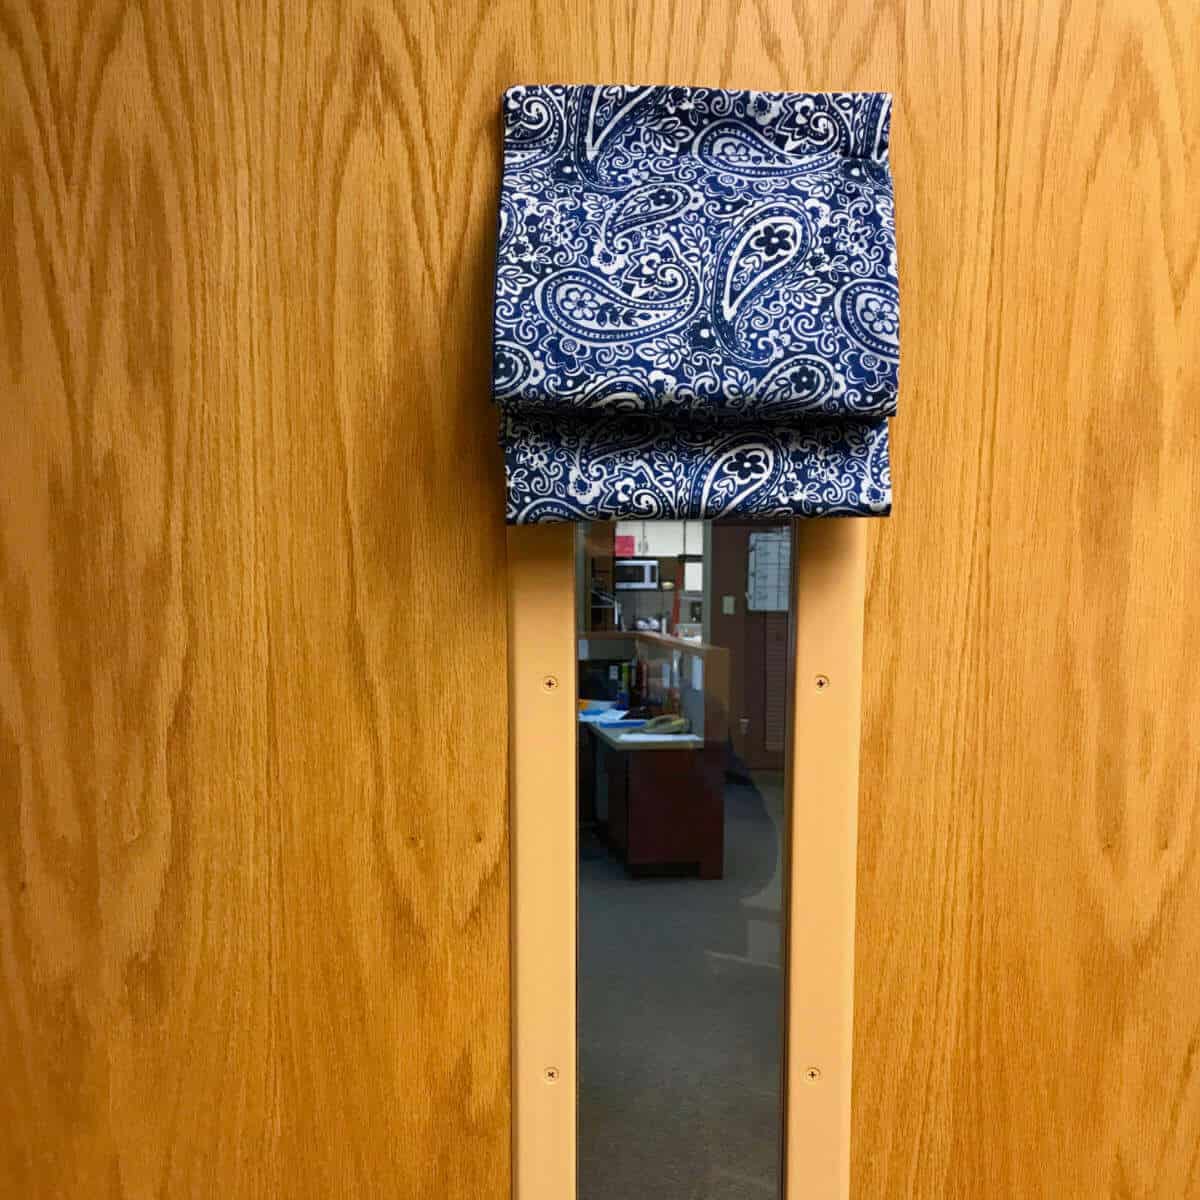 Classroom door with a window and a curtain pushed up on the window.